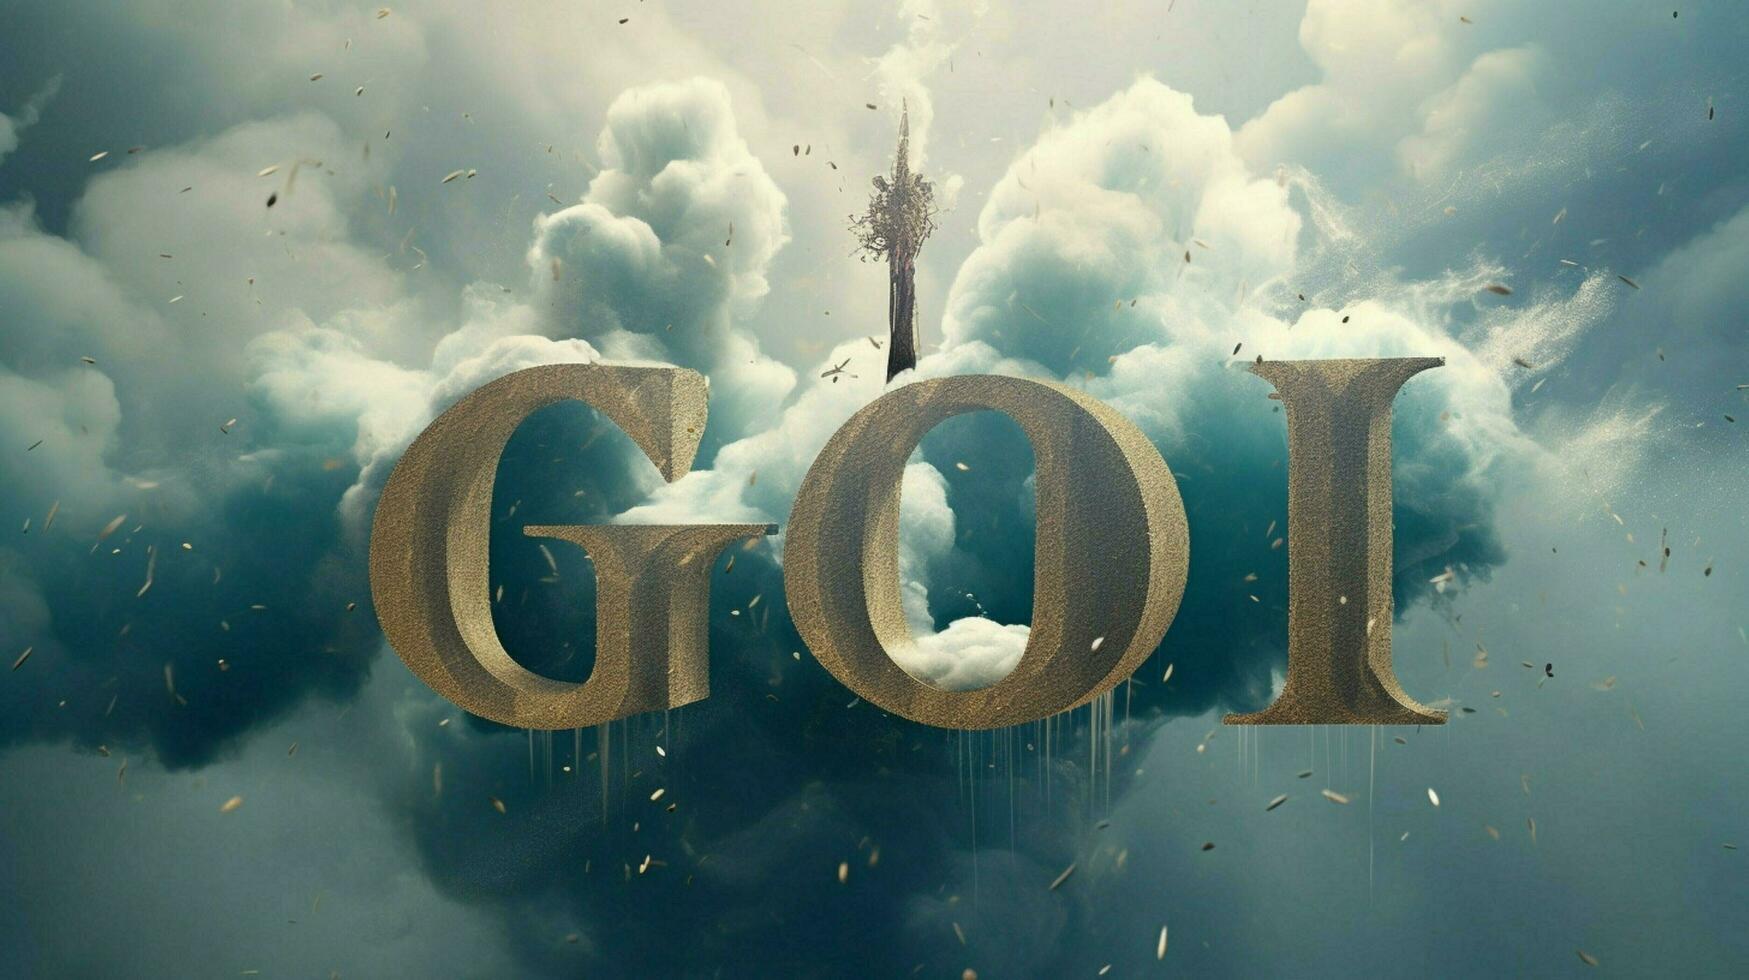 a poster that has the word god on it photo